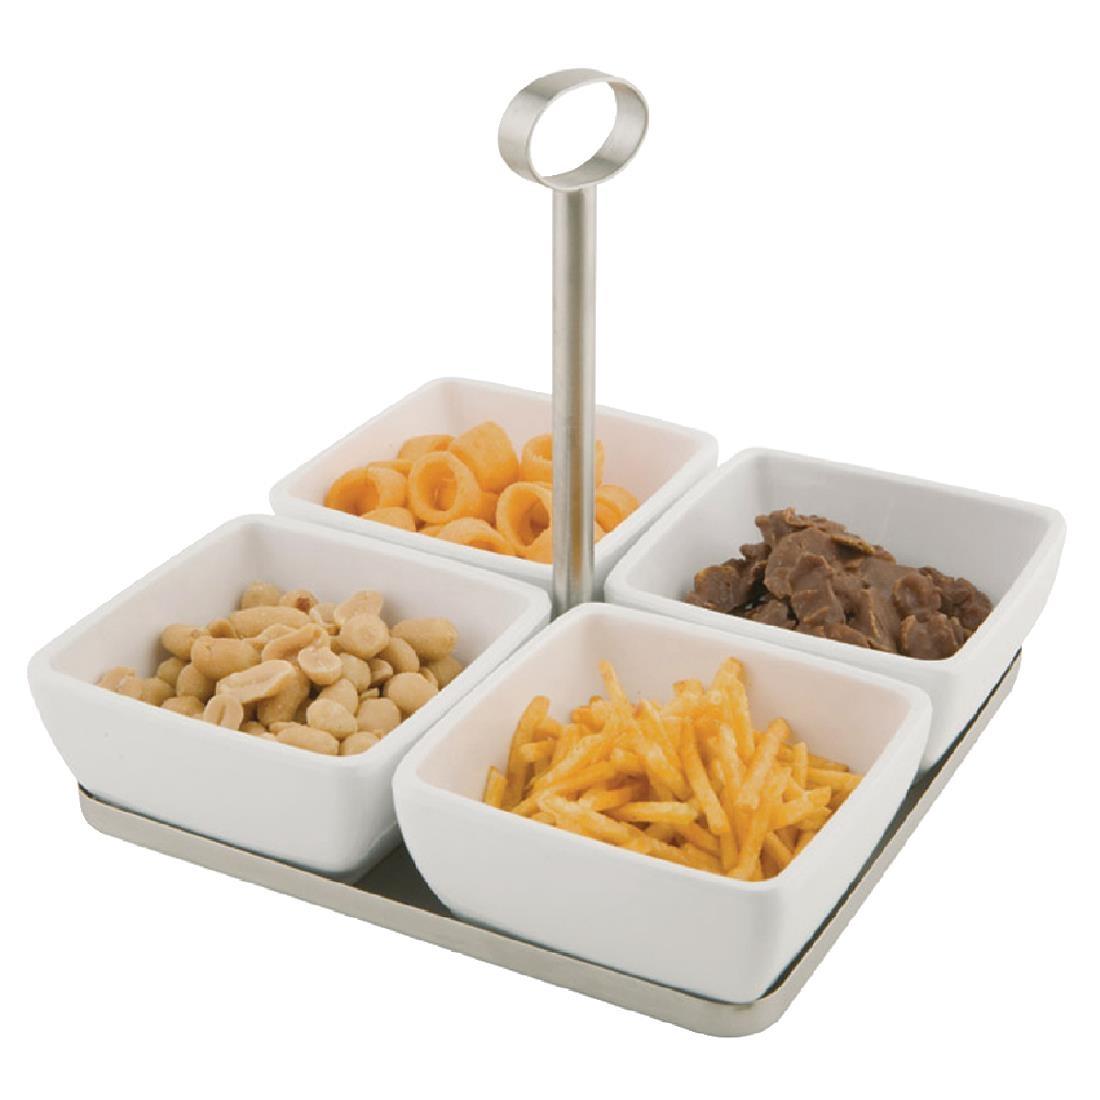 APS Stainless Steel Stand with 4x Bowls - GF164  - 2